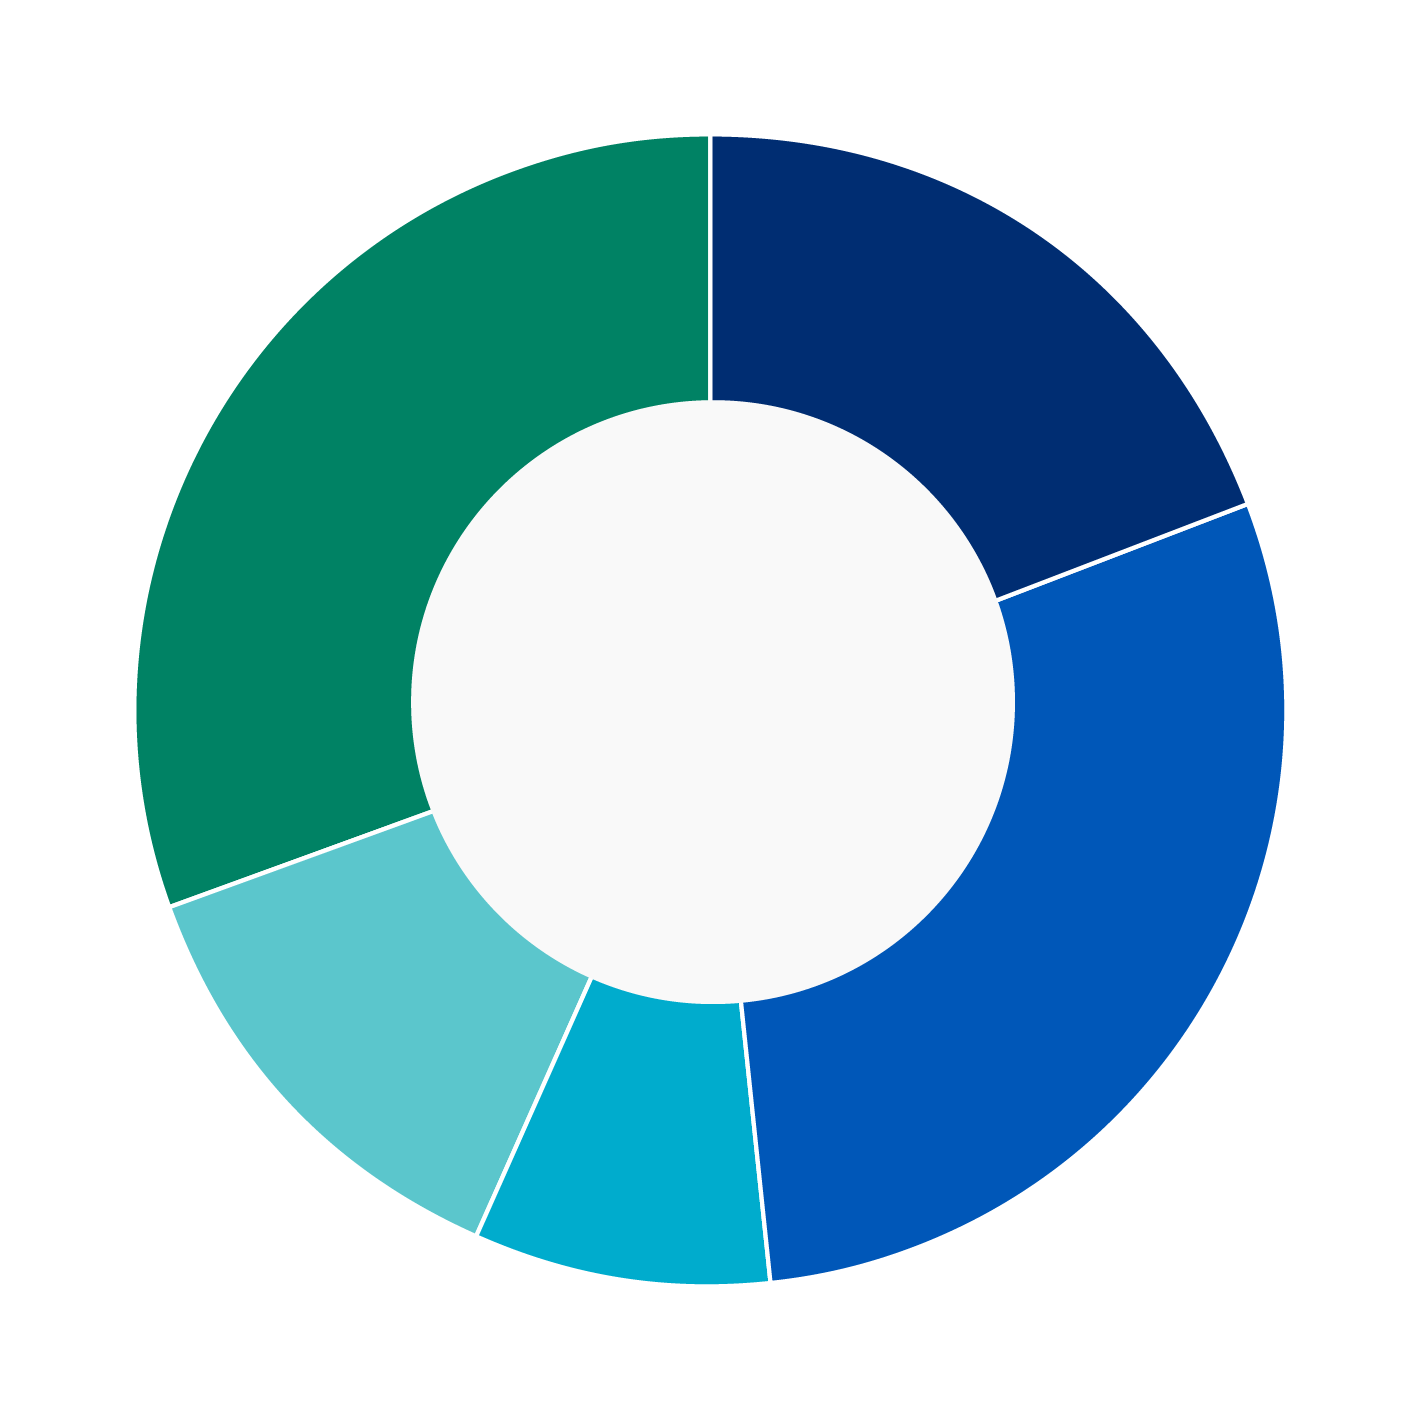 This donut chart shows the percentage of assets allocated to each fund as a percentage of the whole.